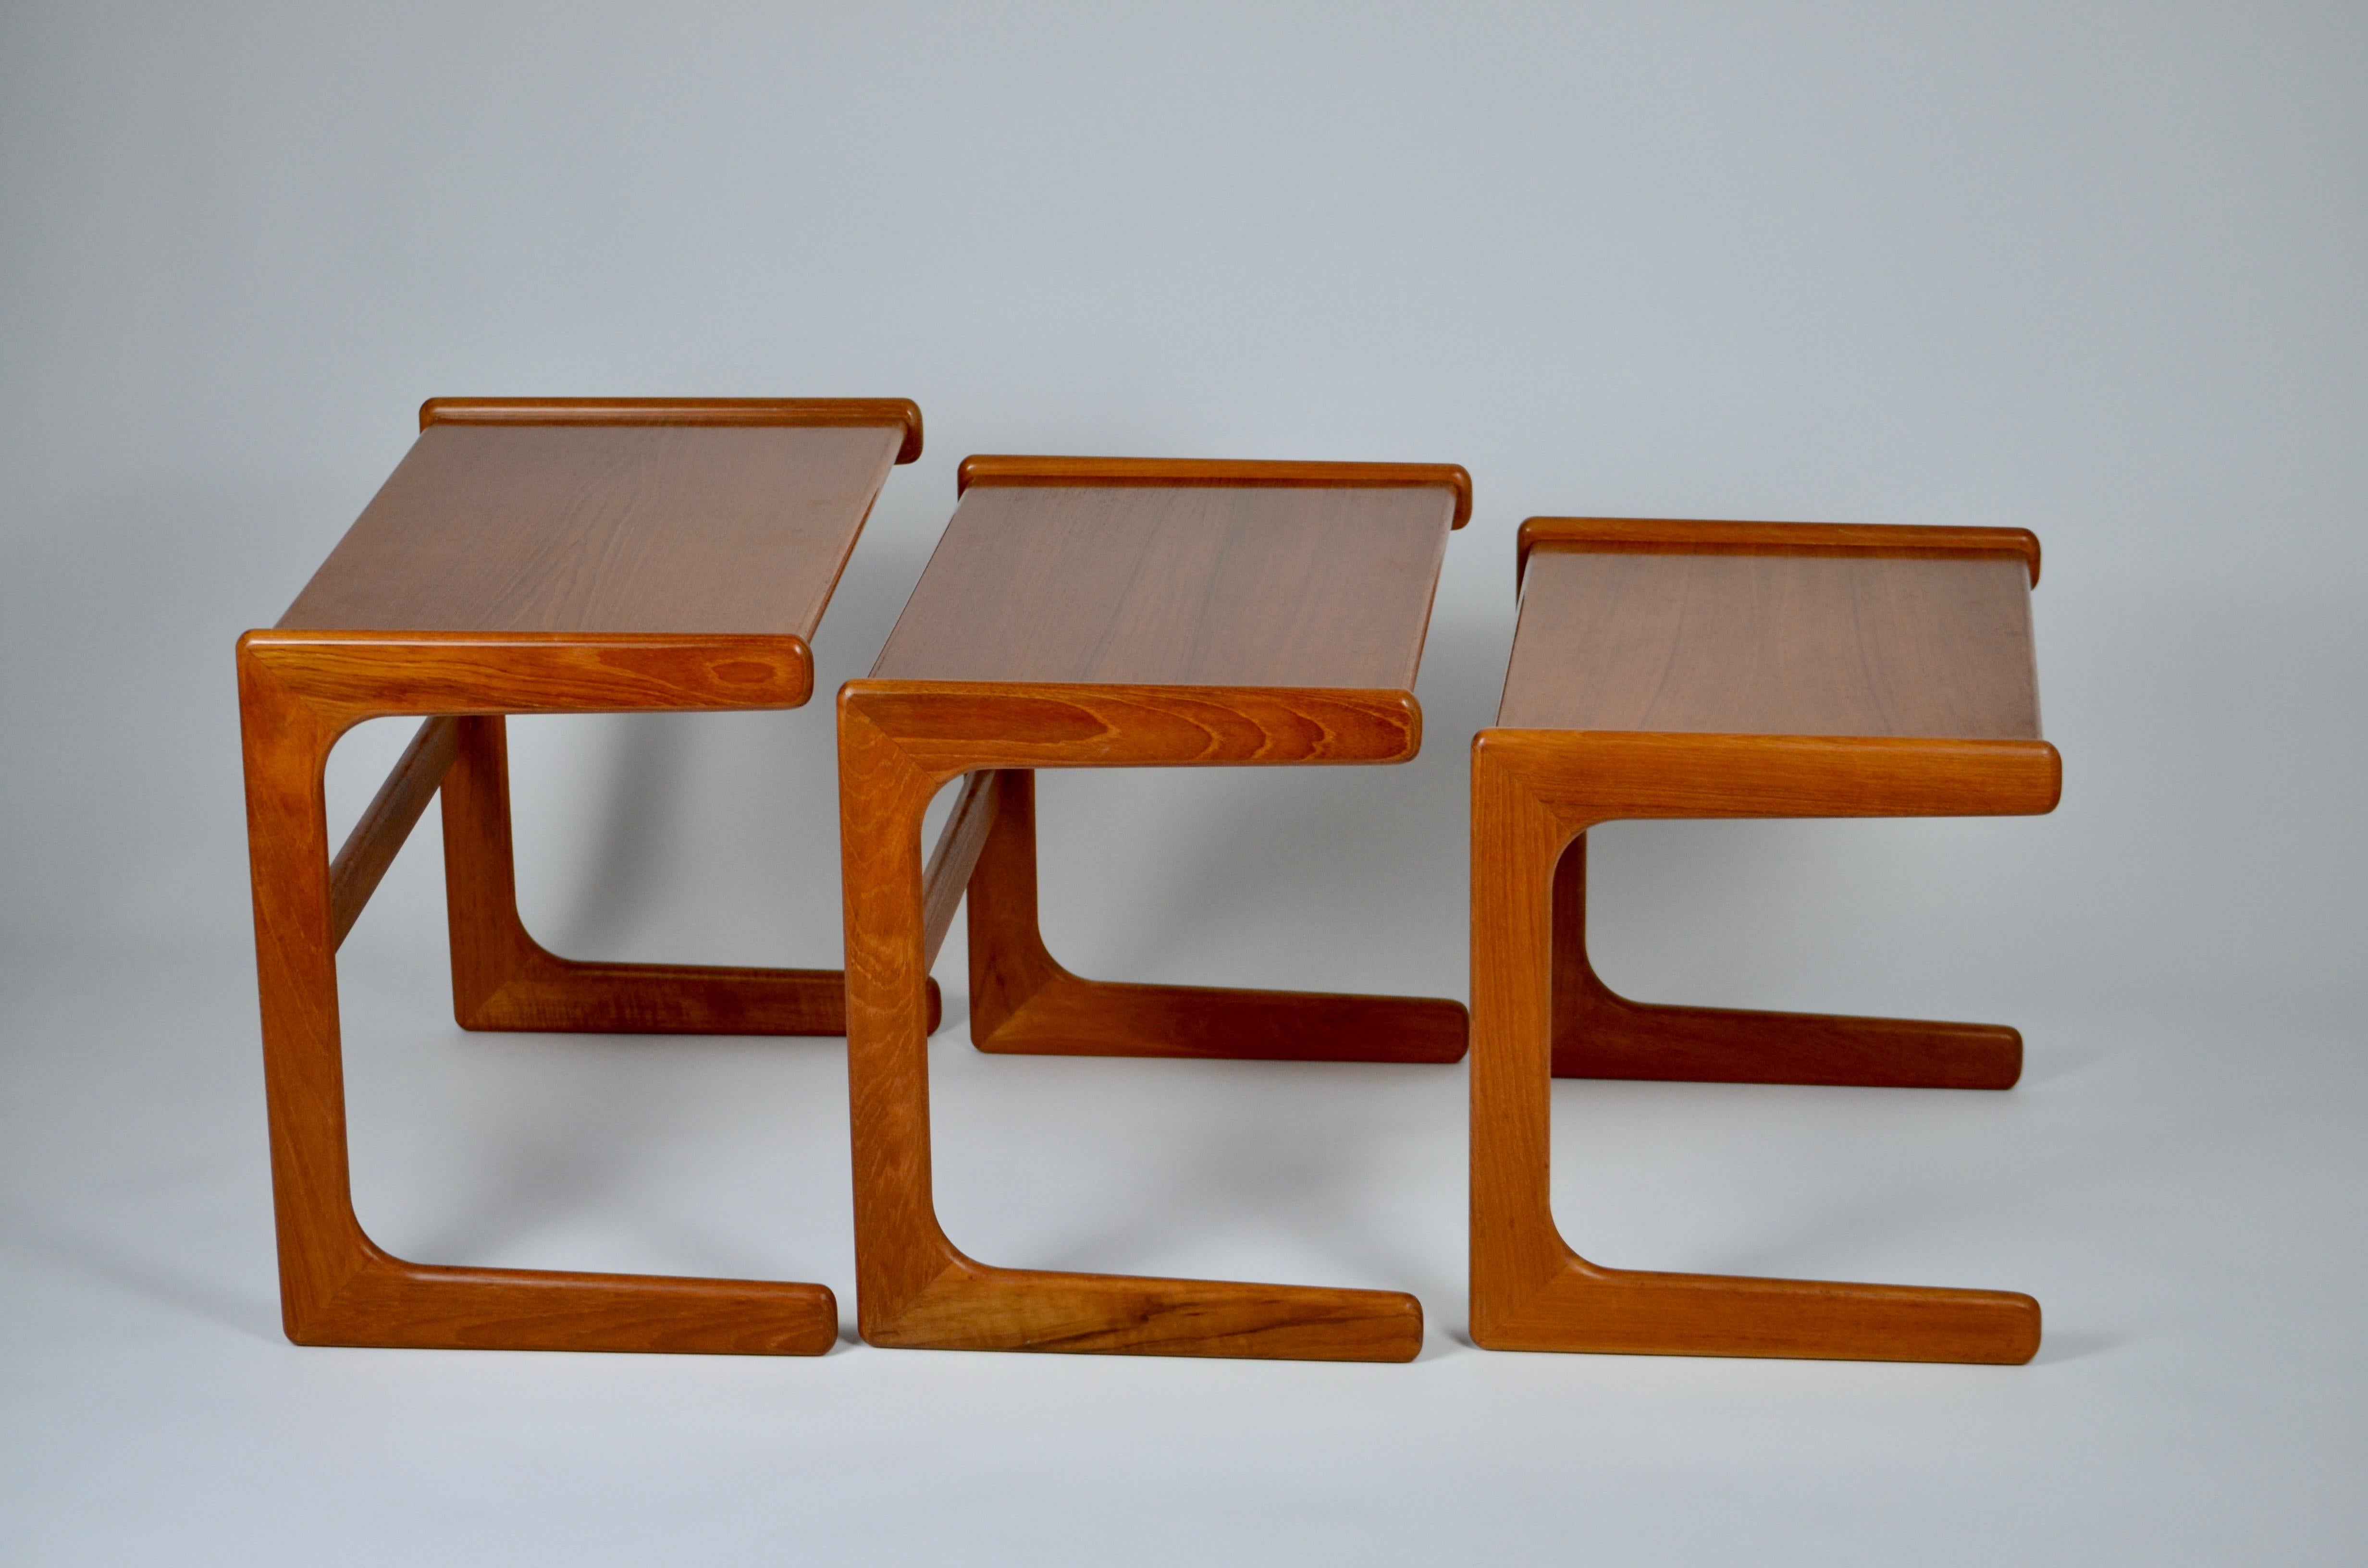 Set of 3 Danish teak nesting tables by Salin Nyborg, 1960s.

Danish design.
The piece has an attribution mark under the smallest table (partly erased):
Made in Danemark, Salin 5800 Nyborg.

Height : 49.5, 45 and 42 cm
Lenght : 61, 56 and 52